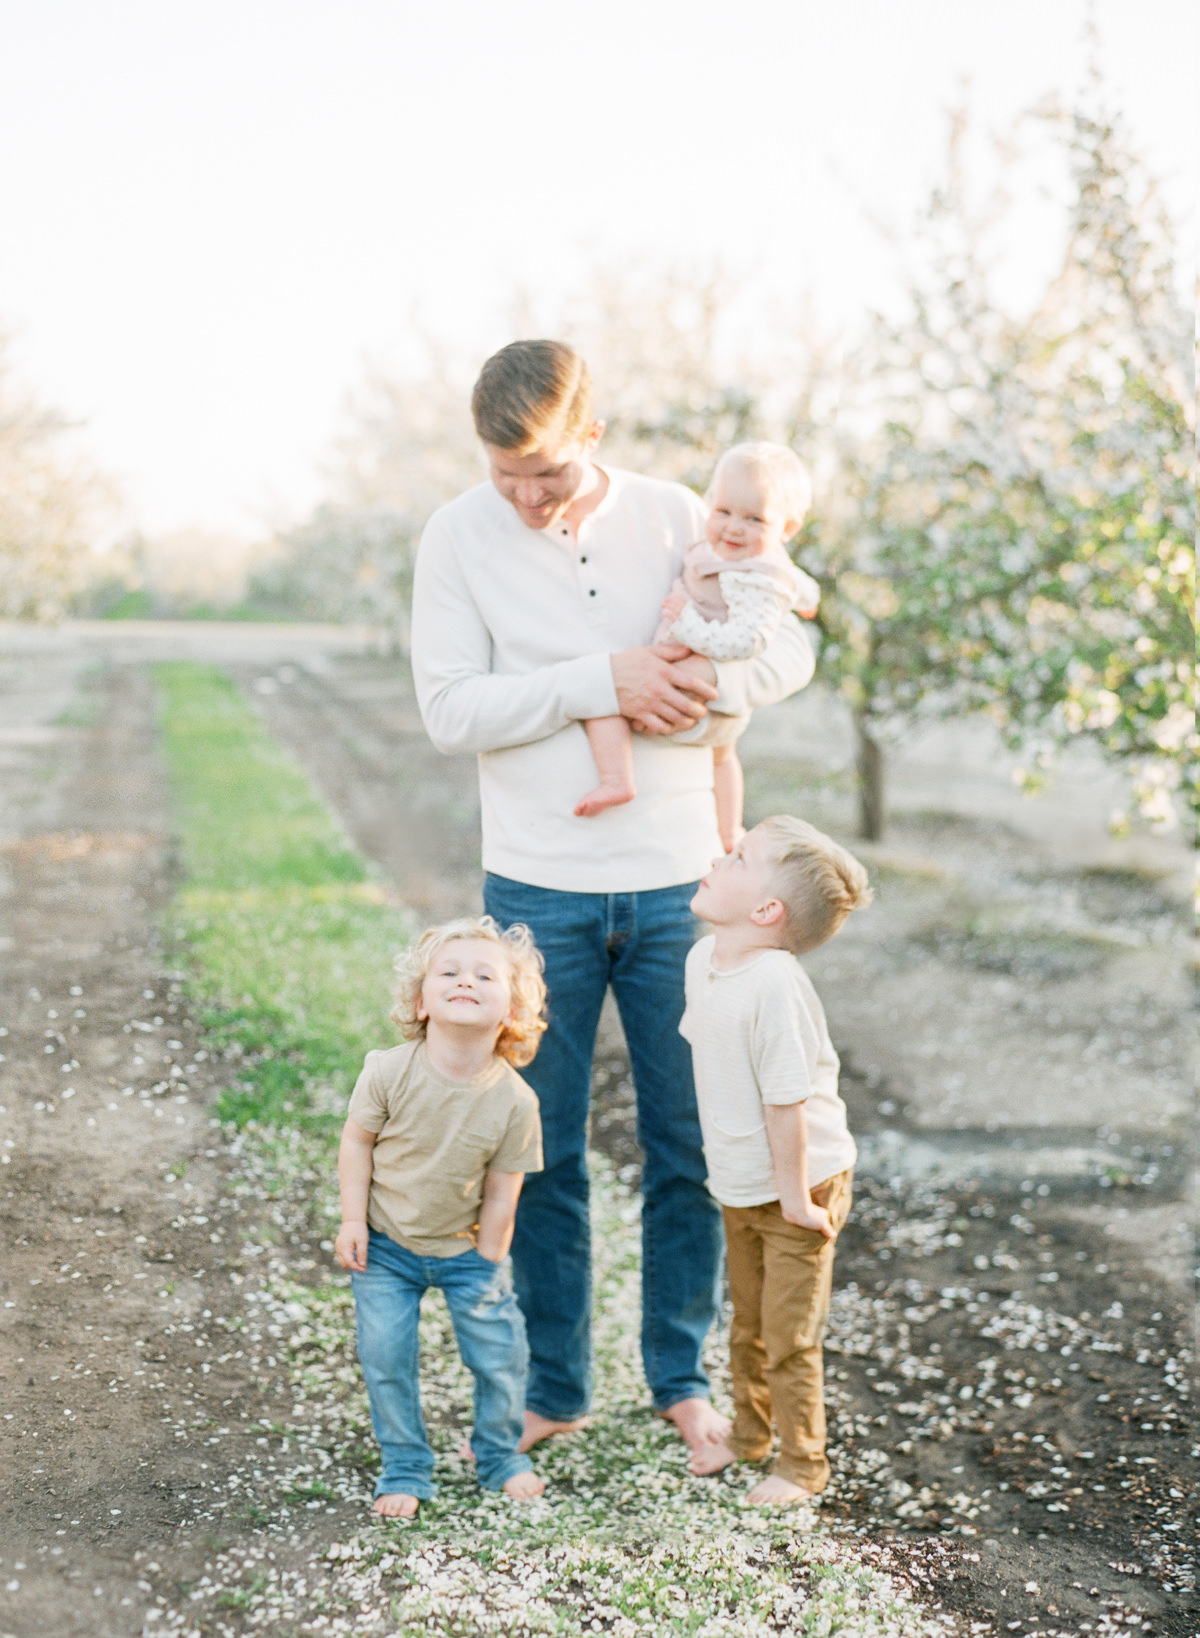 Fathers and Sons, Central Valley Family Session, Almond Grove, Family Photography on Film,  What to Wear for Family Photos, Light and Airy